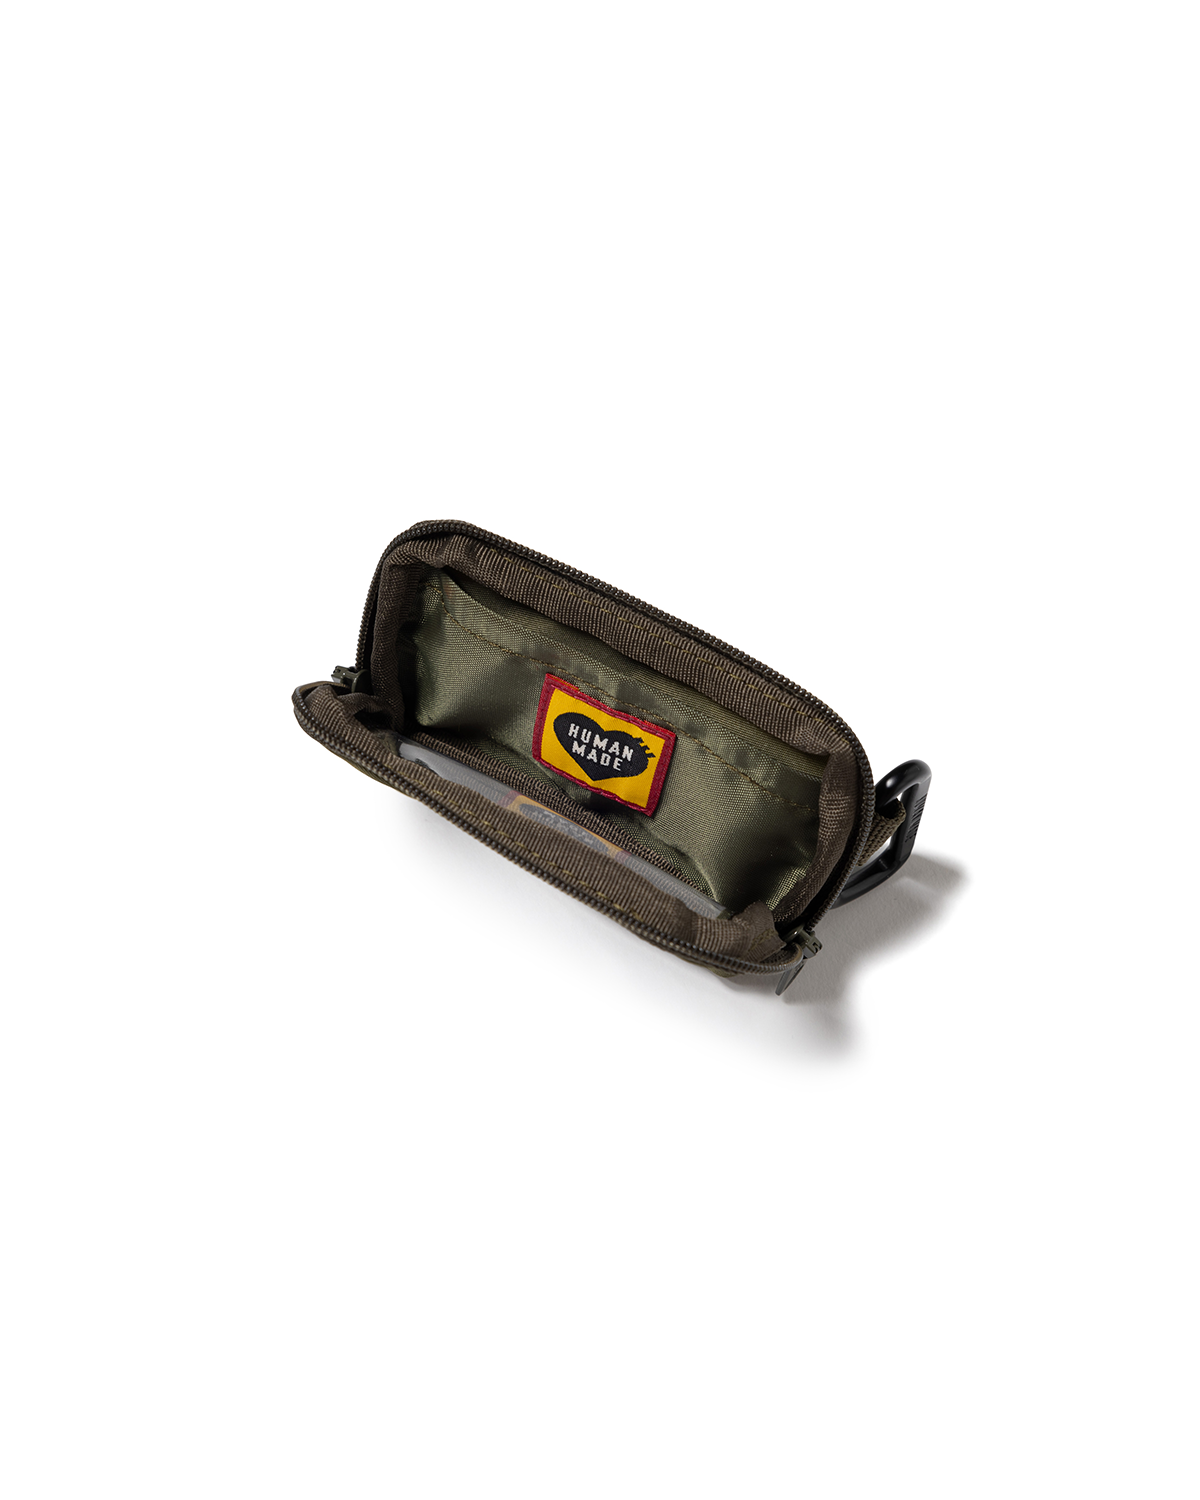 Military Card Case Olive Drab